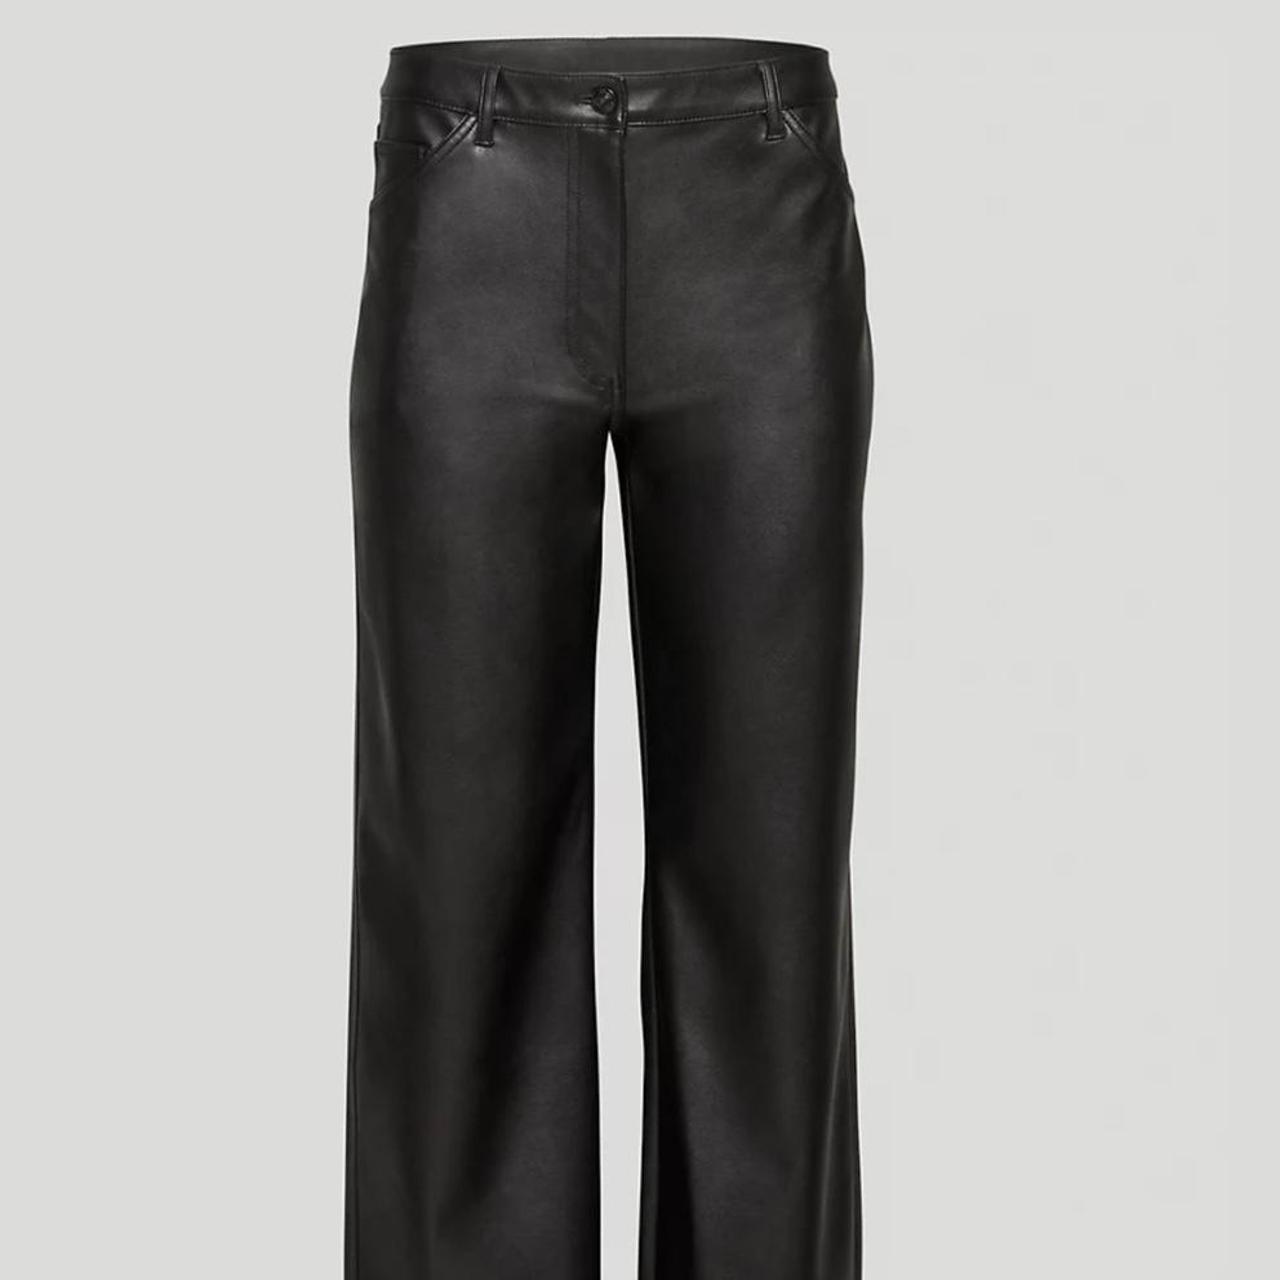 ARITZIA LEATHER PANTS Wilfred Free VALERIE PANT -low... - Depop